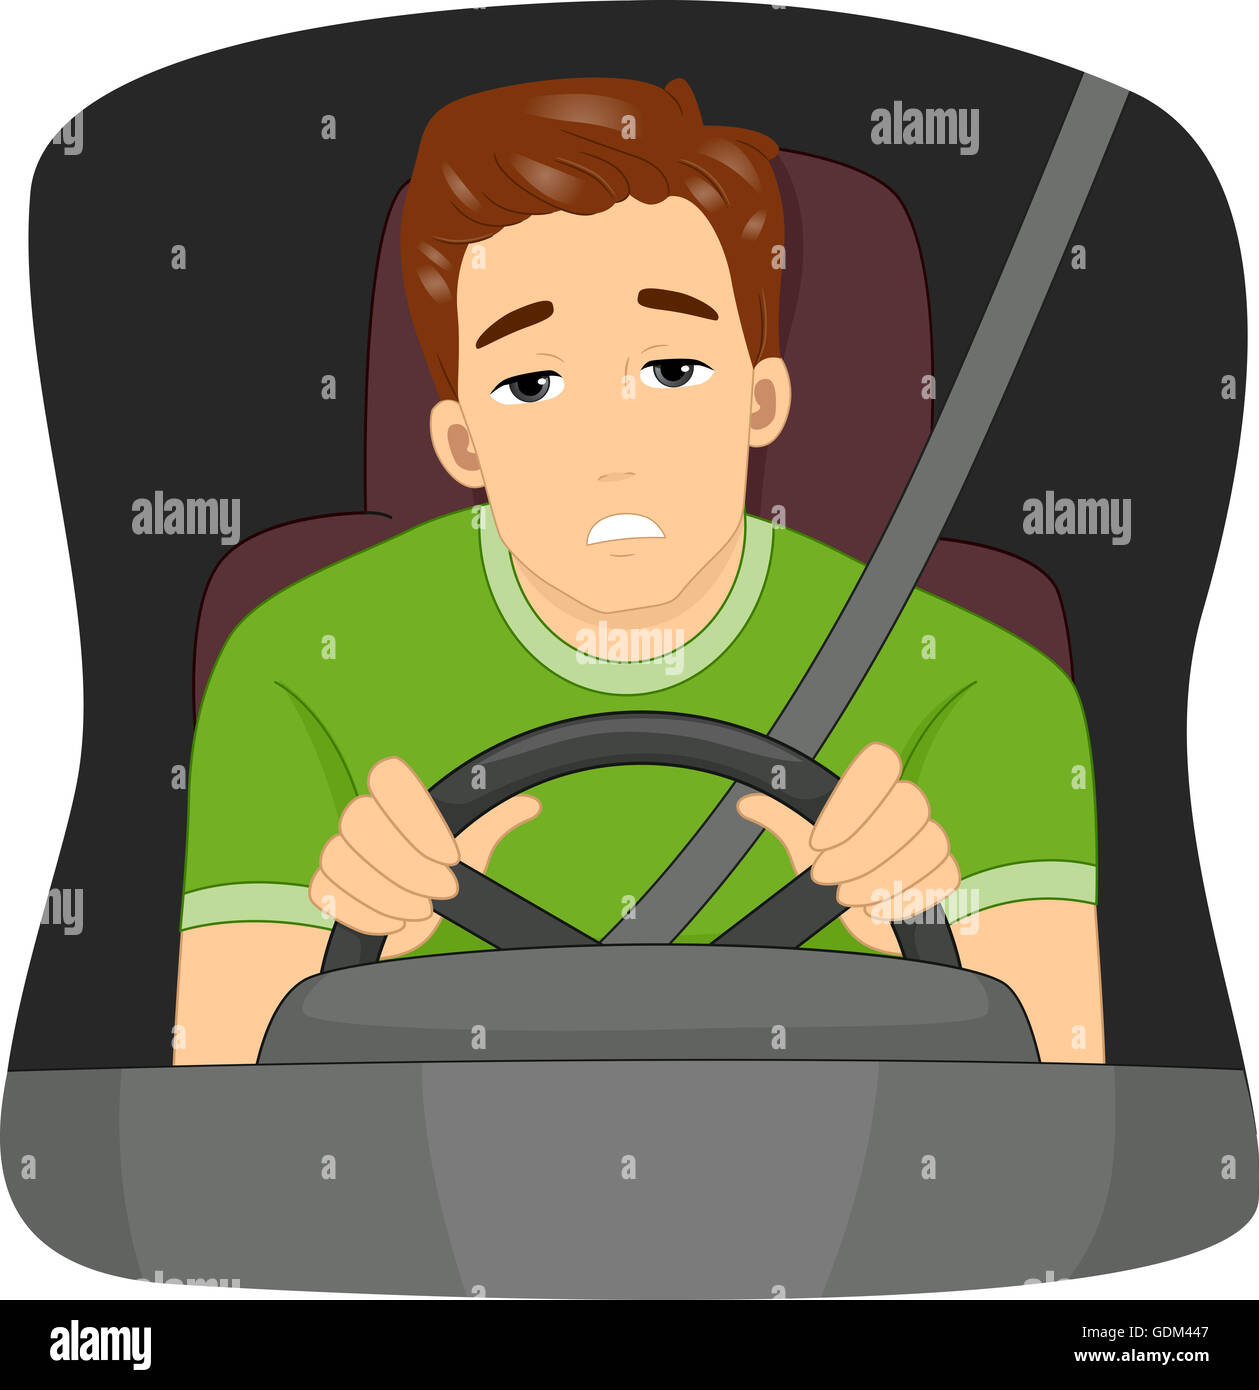 Illustration of a Sleepy Male Driver Dozing Off While Driving Stock Photo